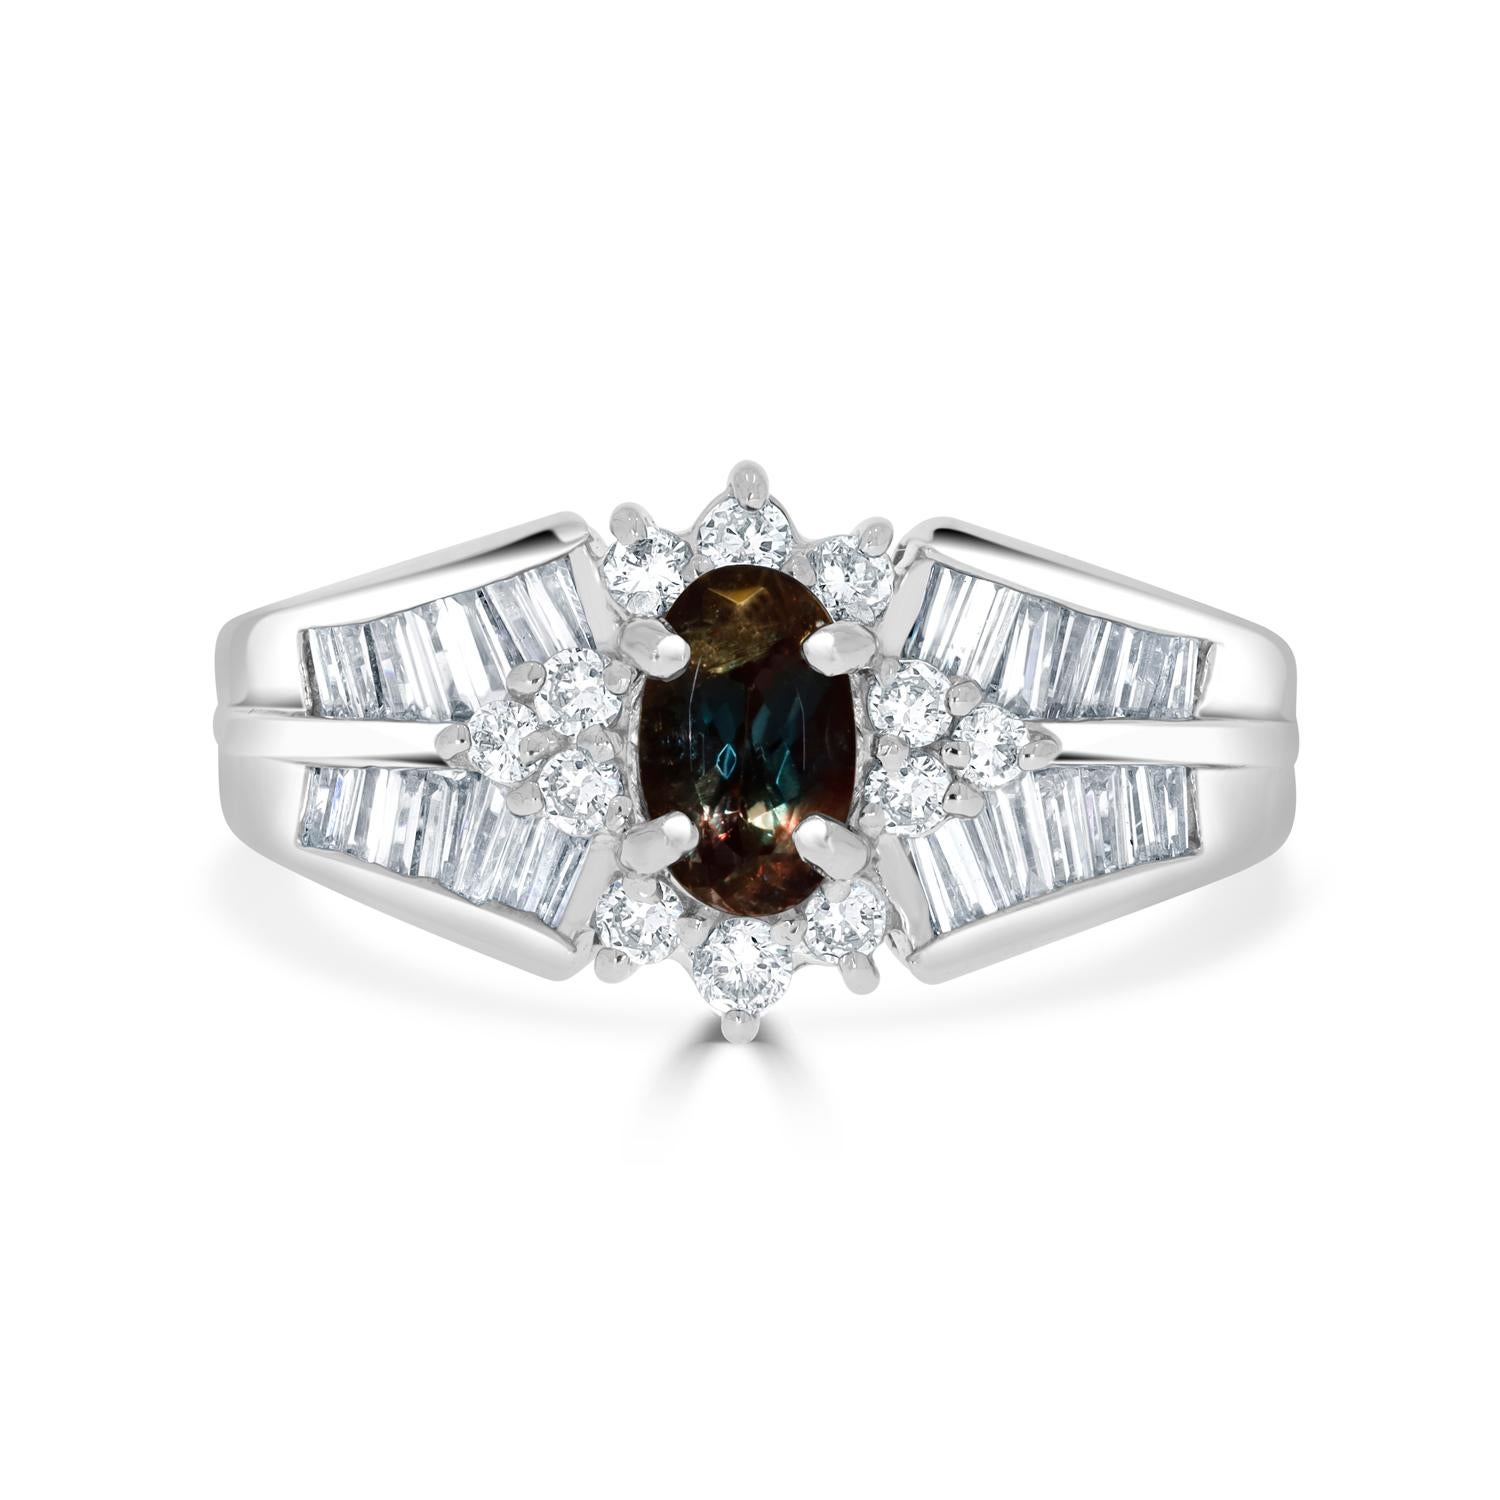 For An Endless Stylish Look, This Ring Is Styled With Pt 950 Platinum Featuring An Eye-catching Oval-cut Alexandrite In The Center. The Luxurious Shine Of The 40 Round And Baguette-cut Diamonds That Surround The Gemstone Exudes Magical Allure.
